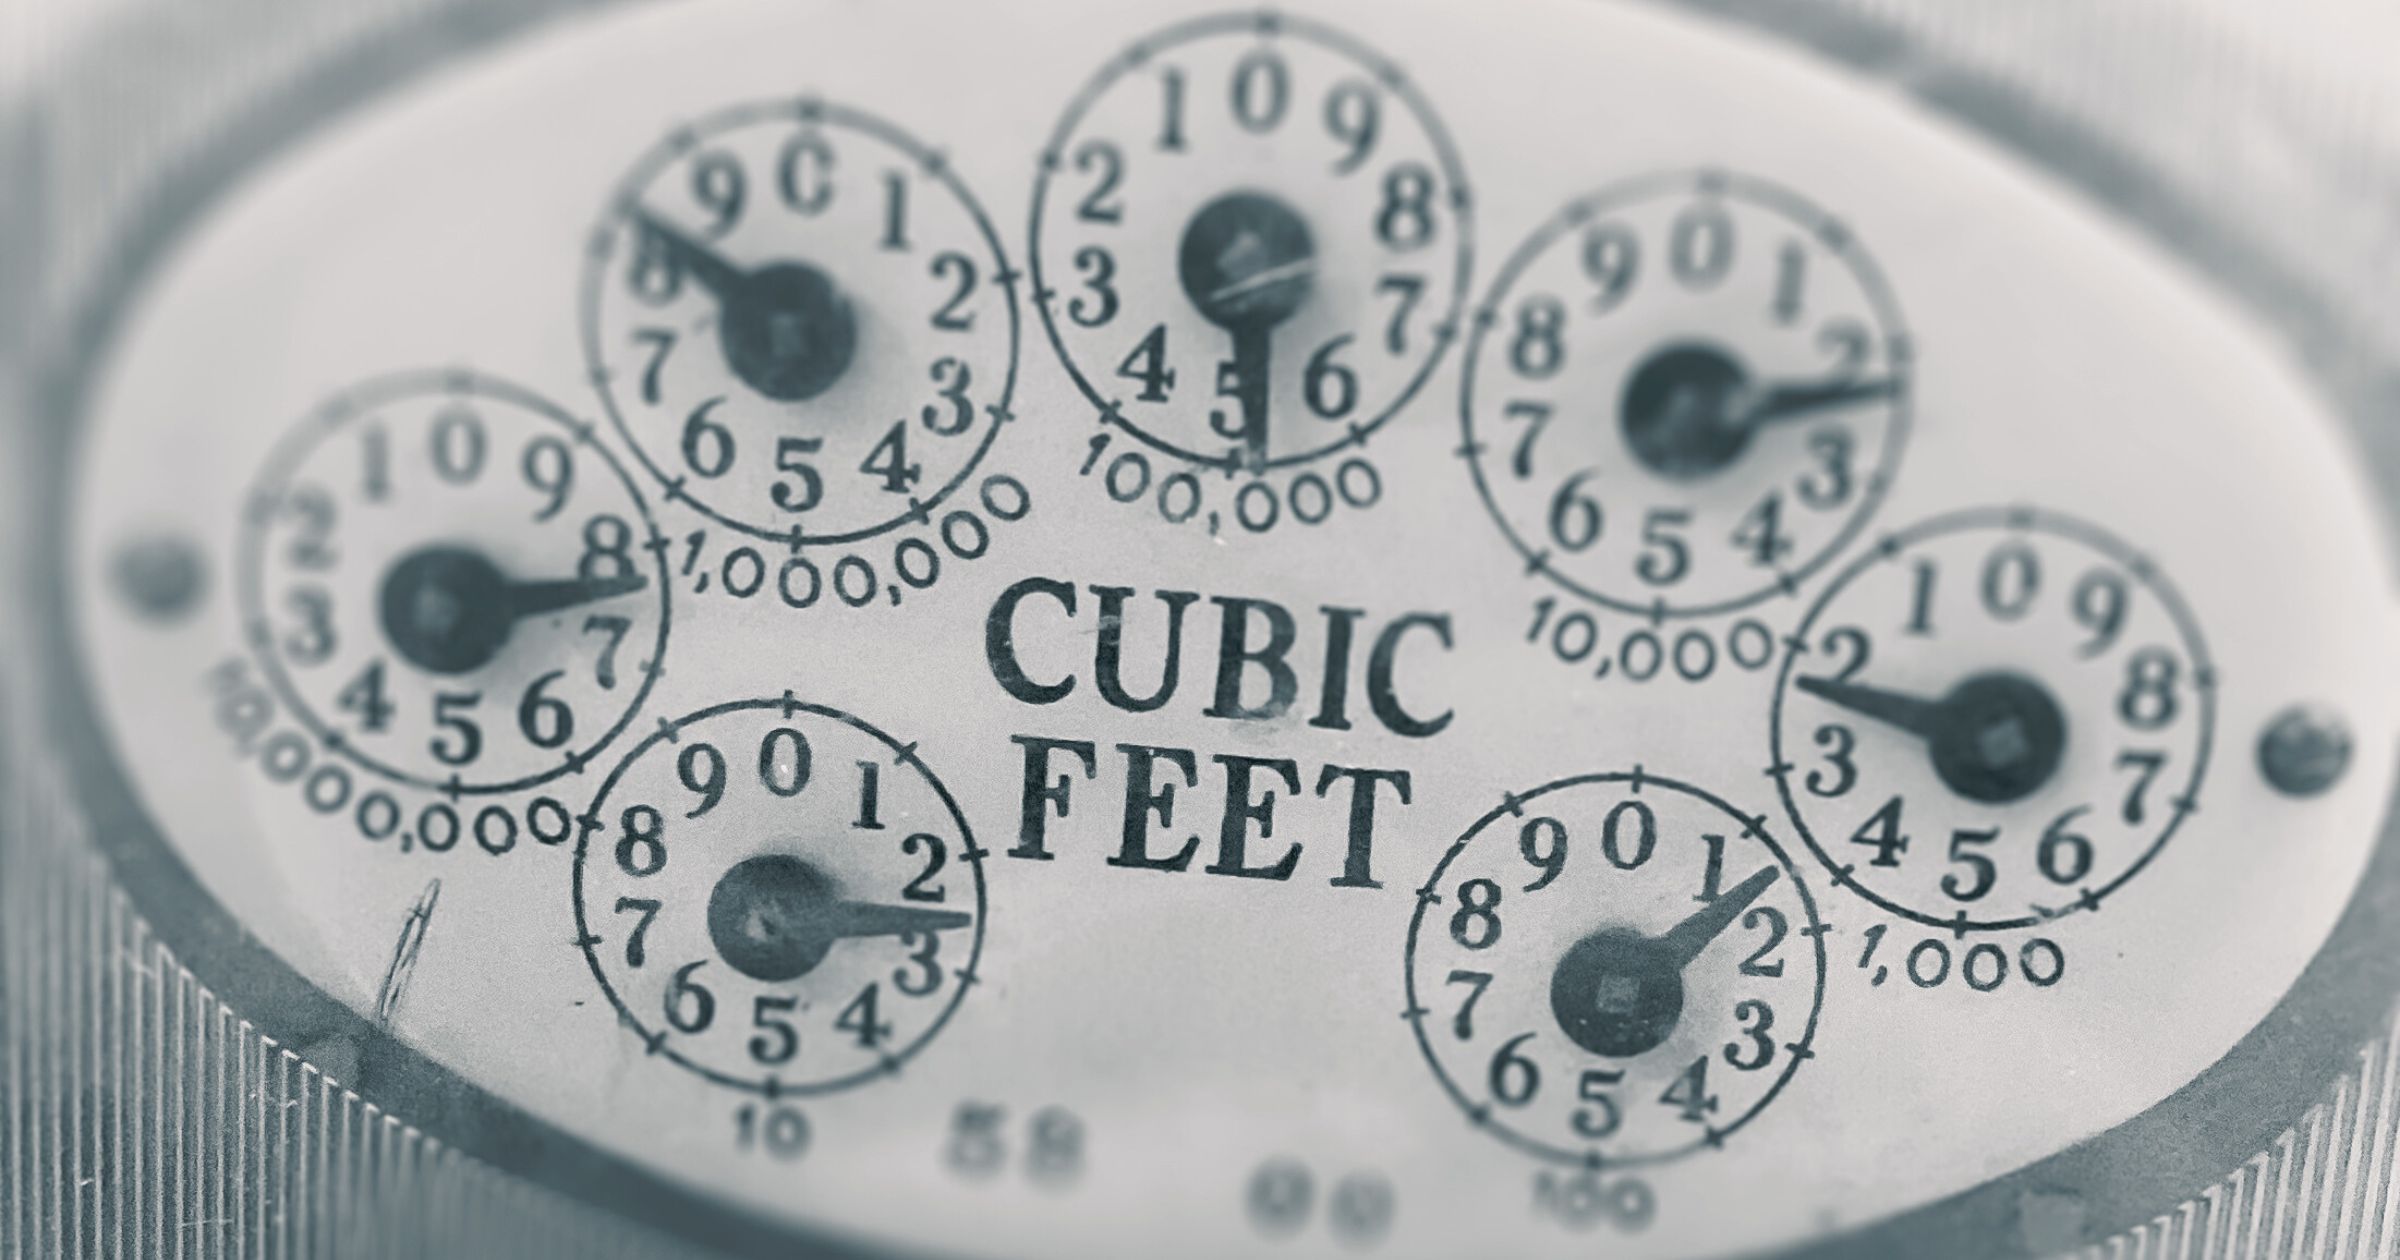 A close-up photograph of a dial meter showing cubic feet as the unit.